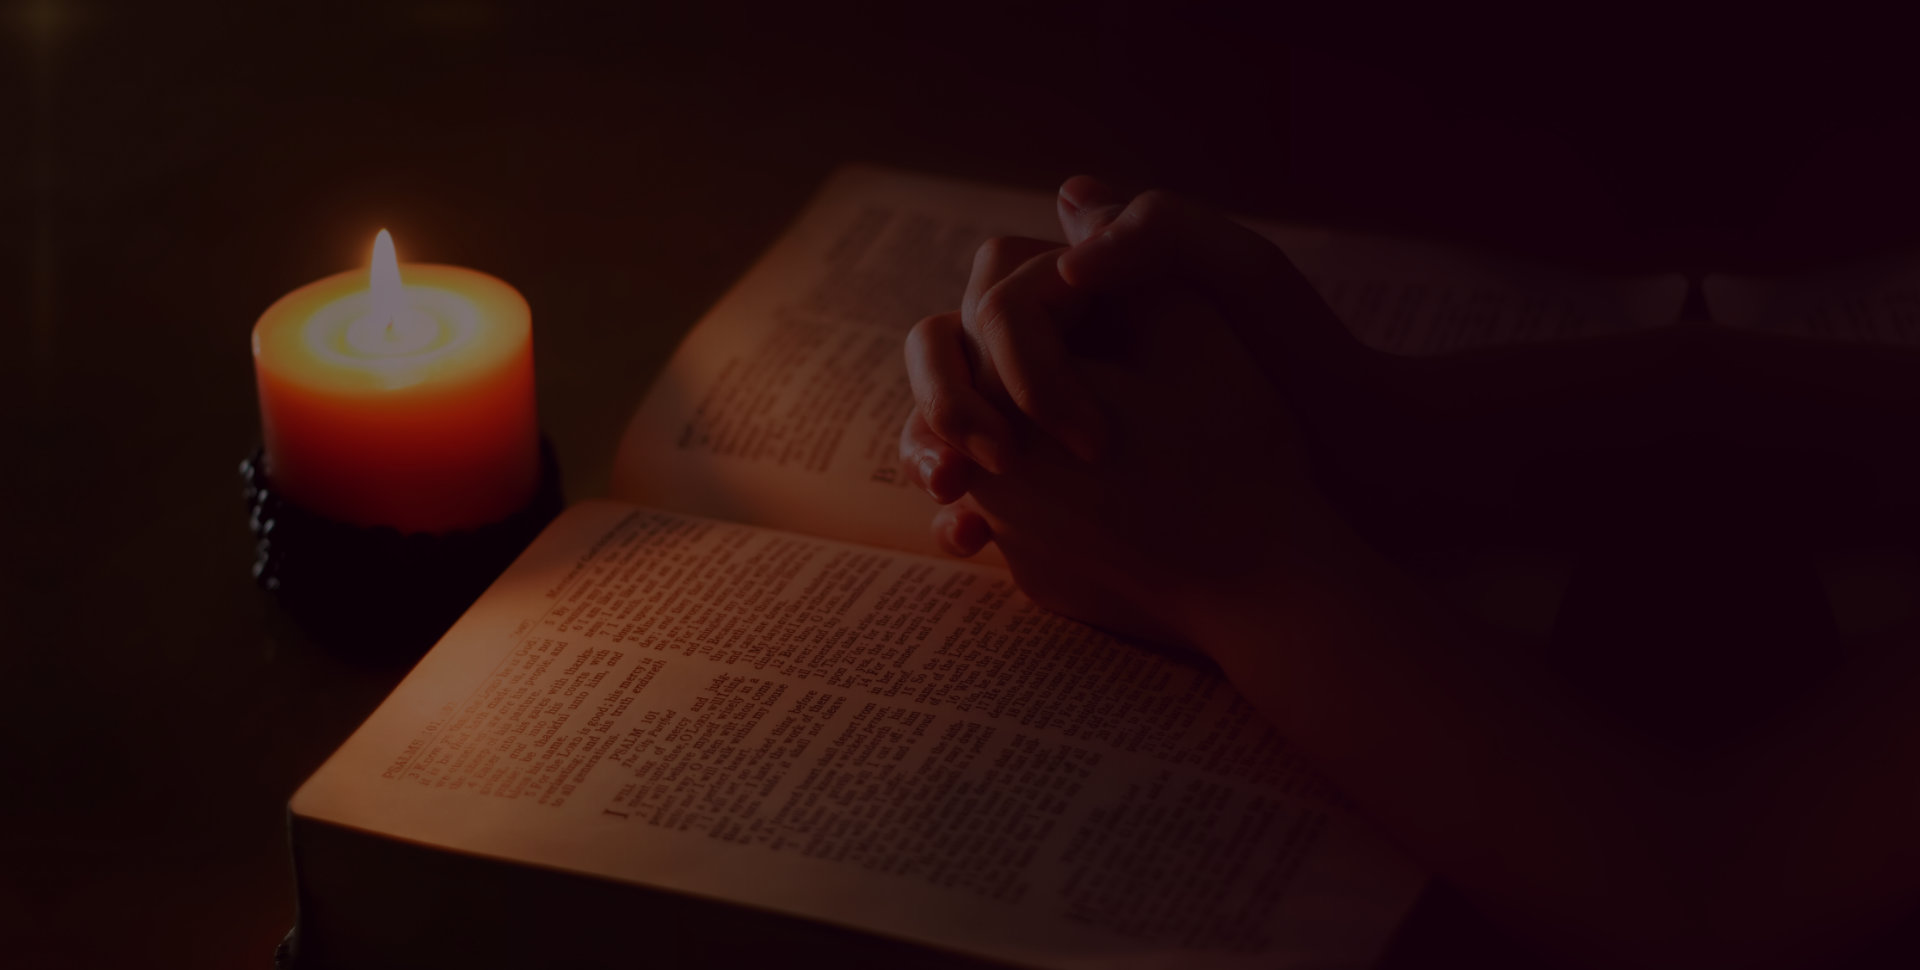 bible, hands, candle